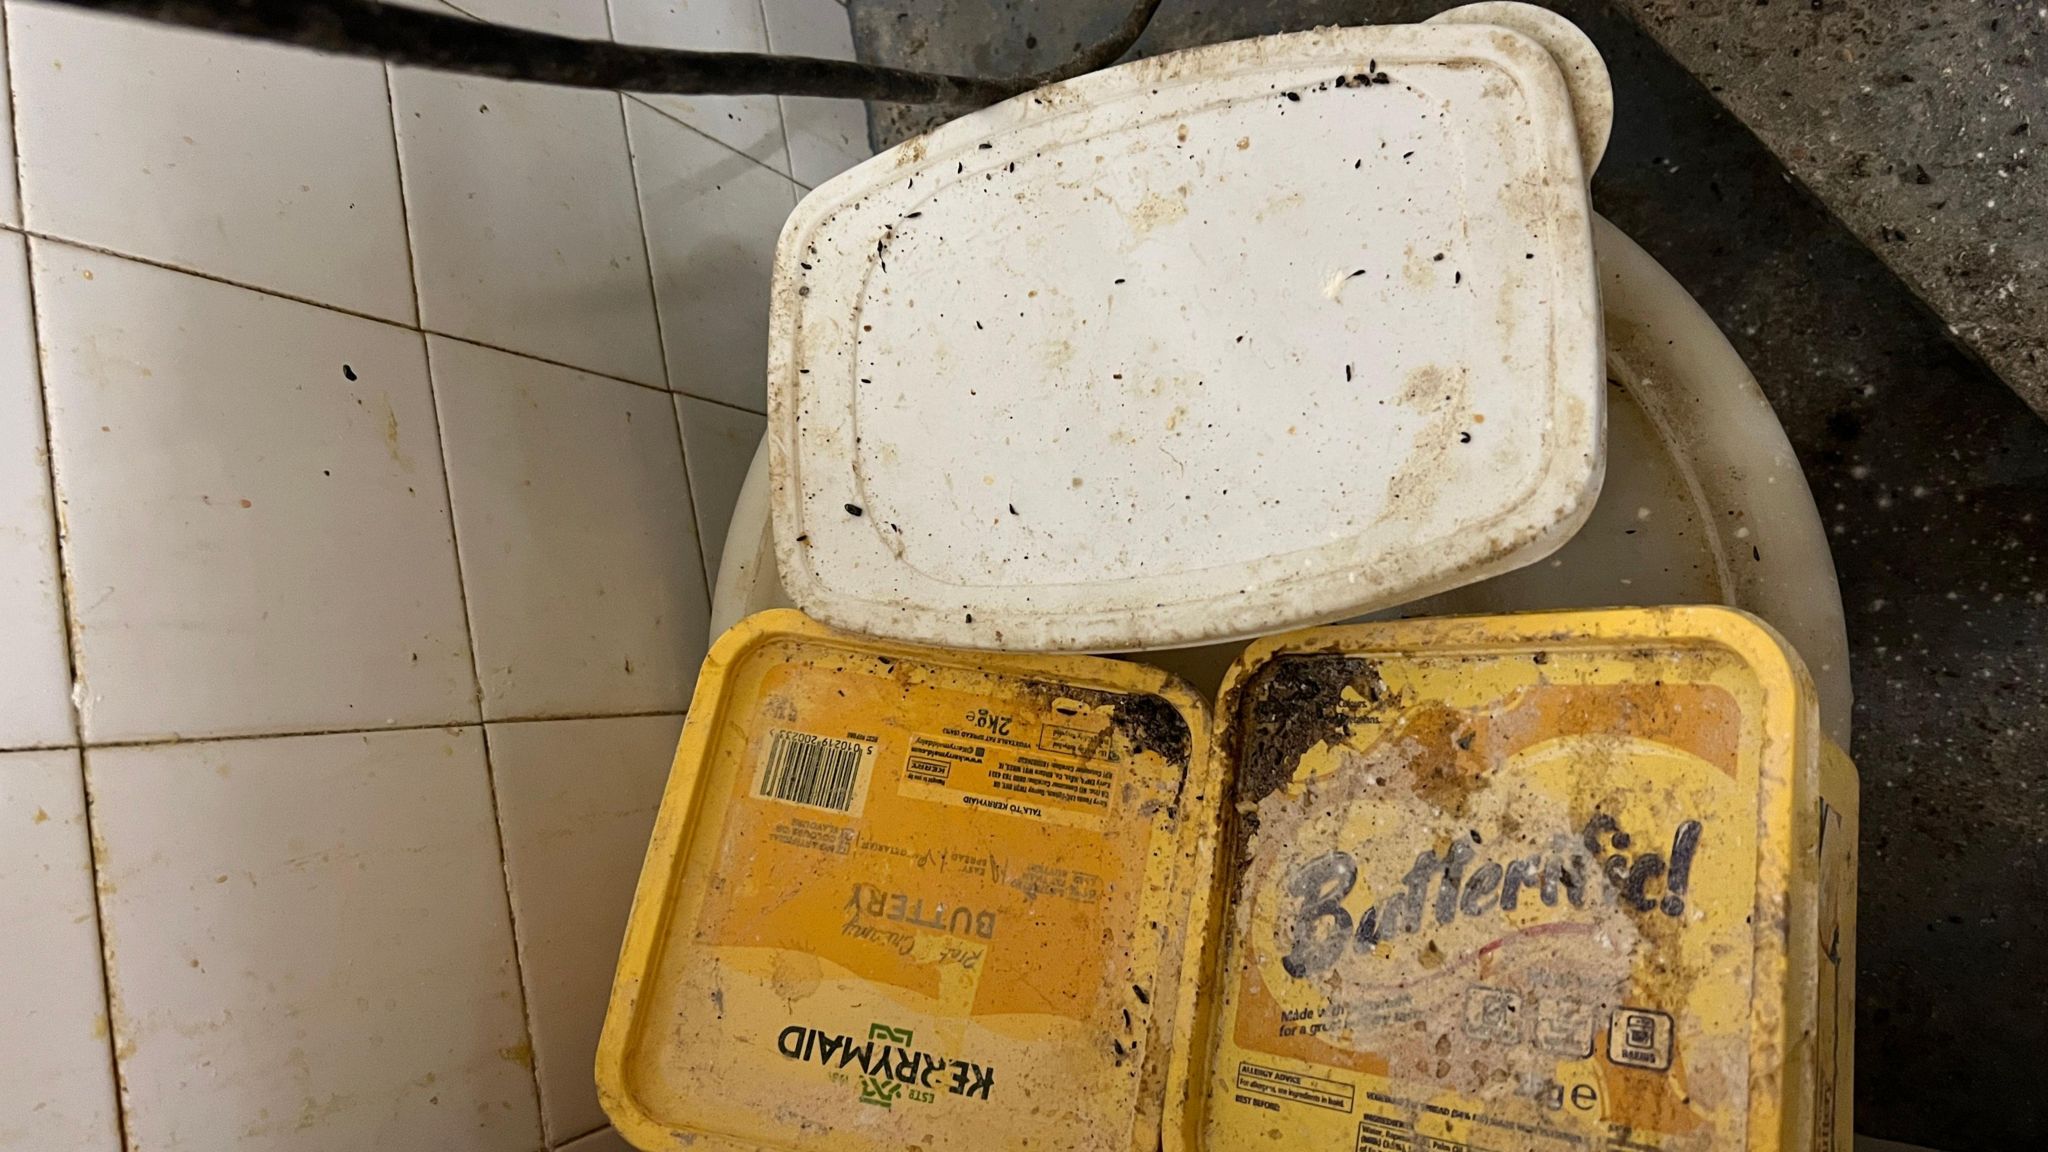 Butter dishes covered in dirt